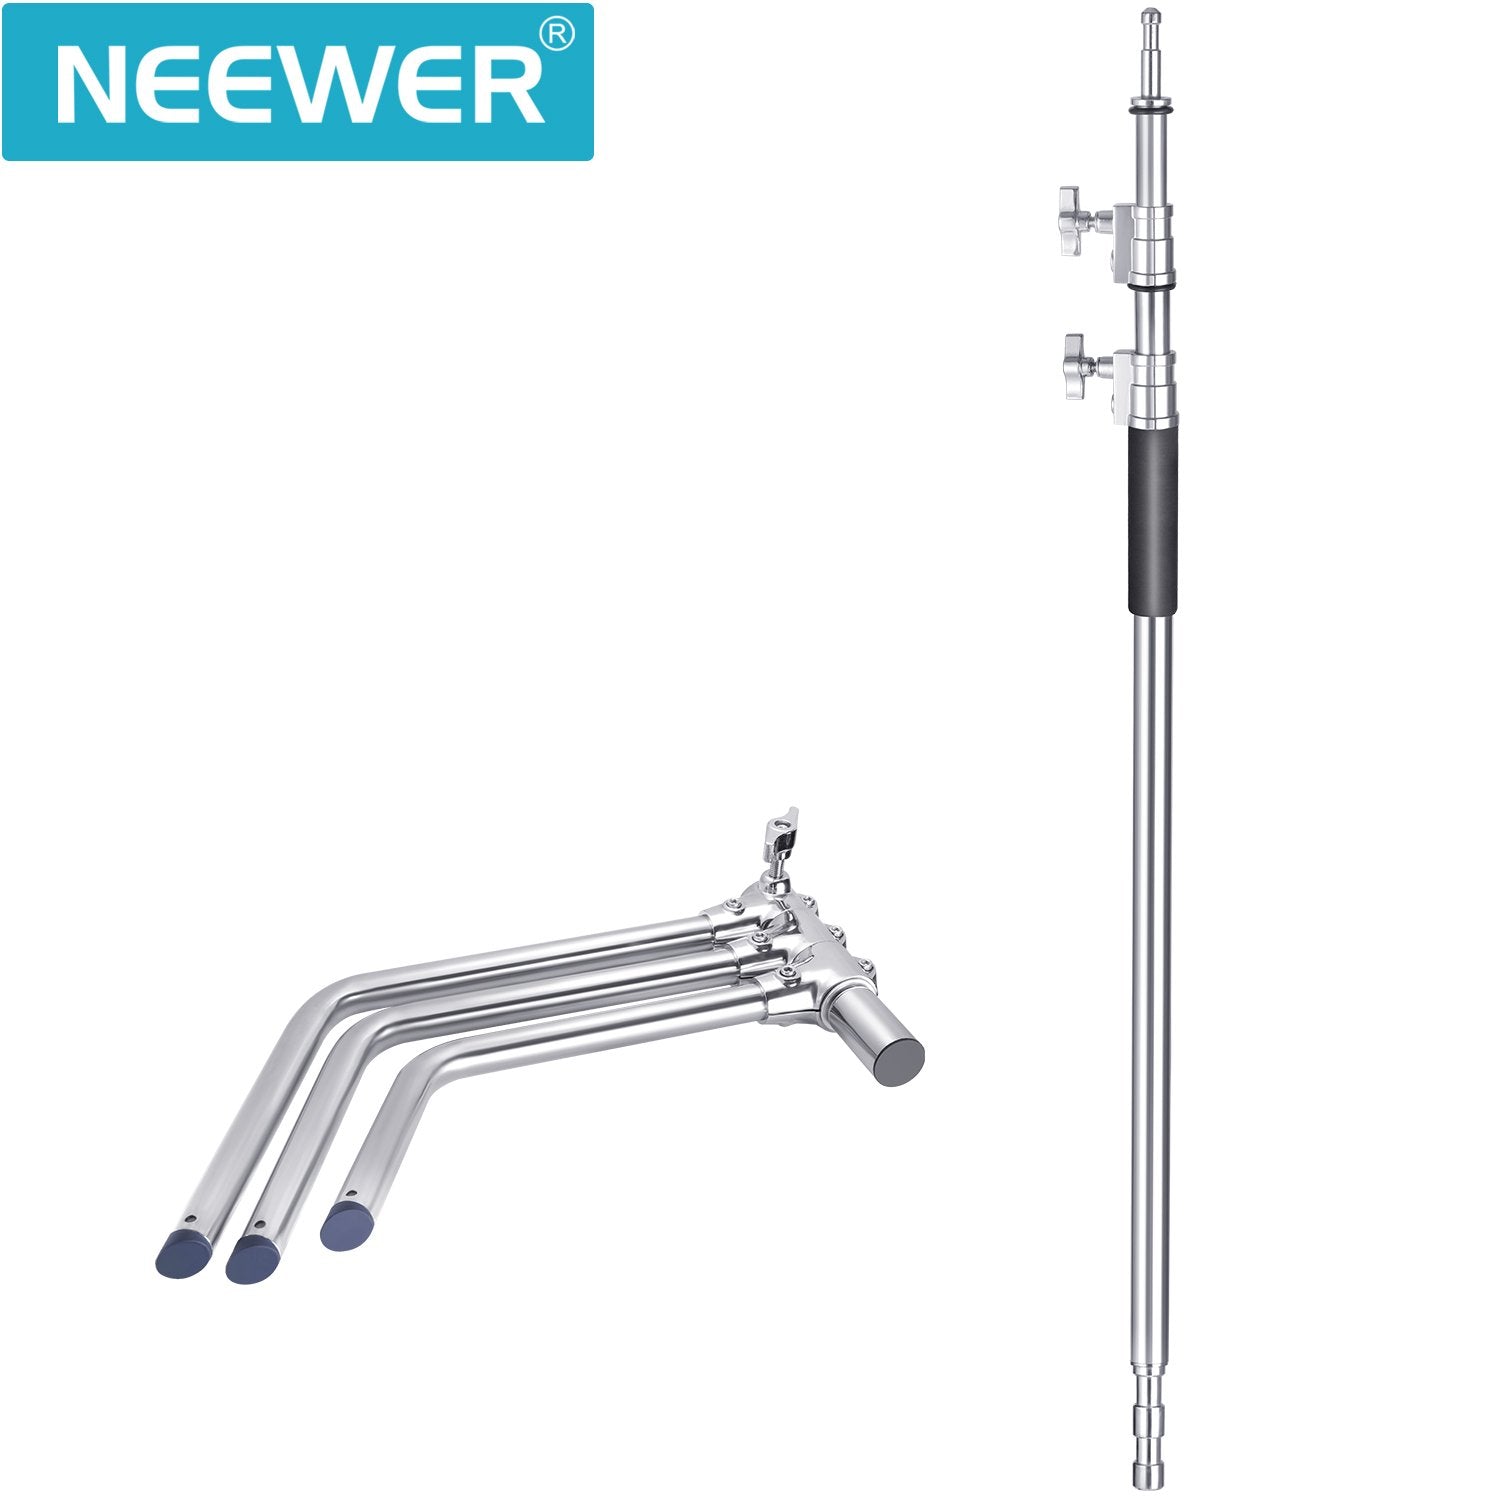 Neewer Stainless Steel Heavy Duty C-Stand, 5-10 feet/1.5-3m Adjustable Photographic Sturdy Tripod - neewer.com